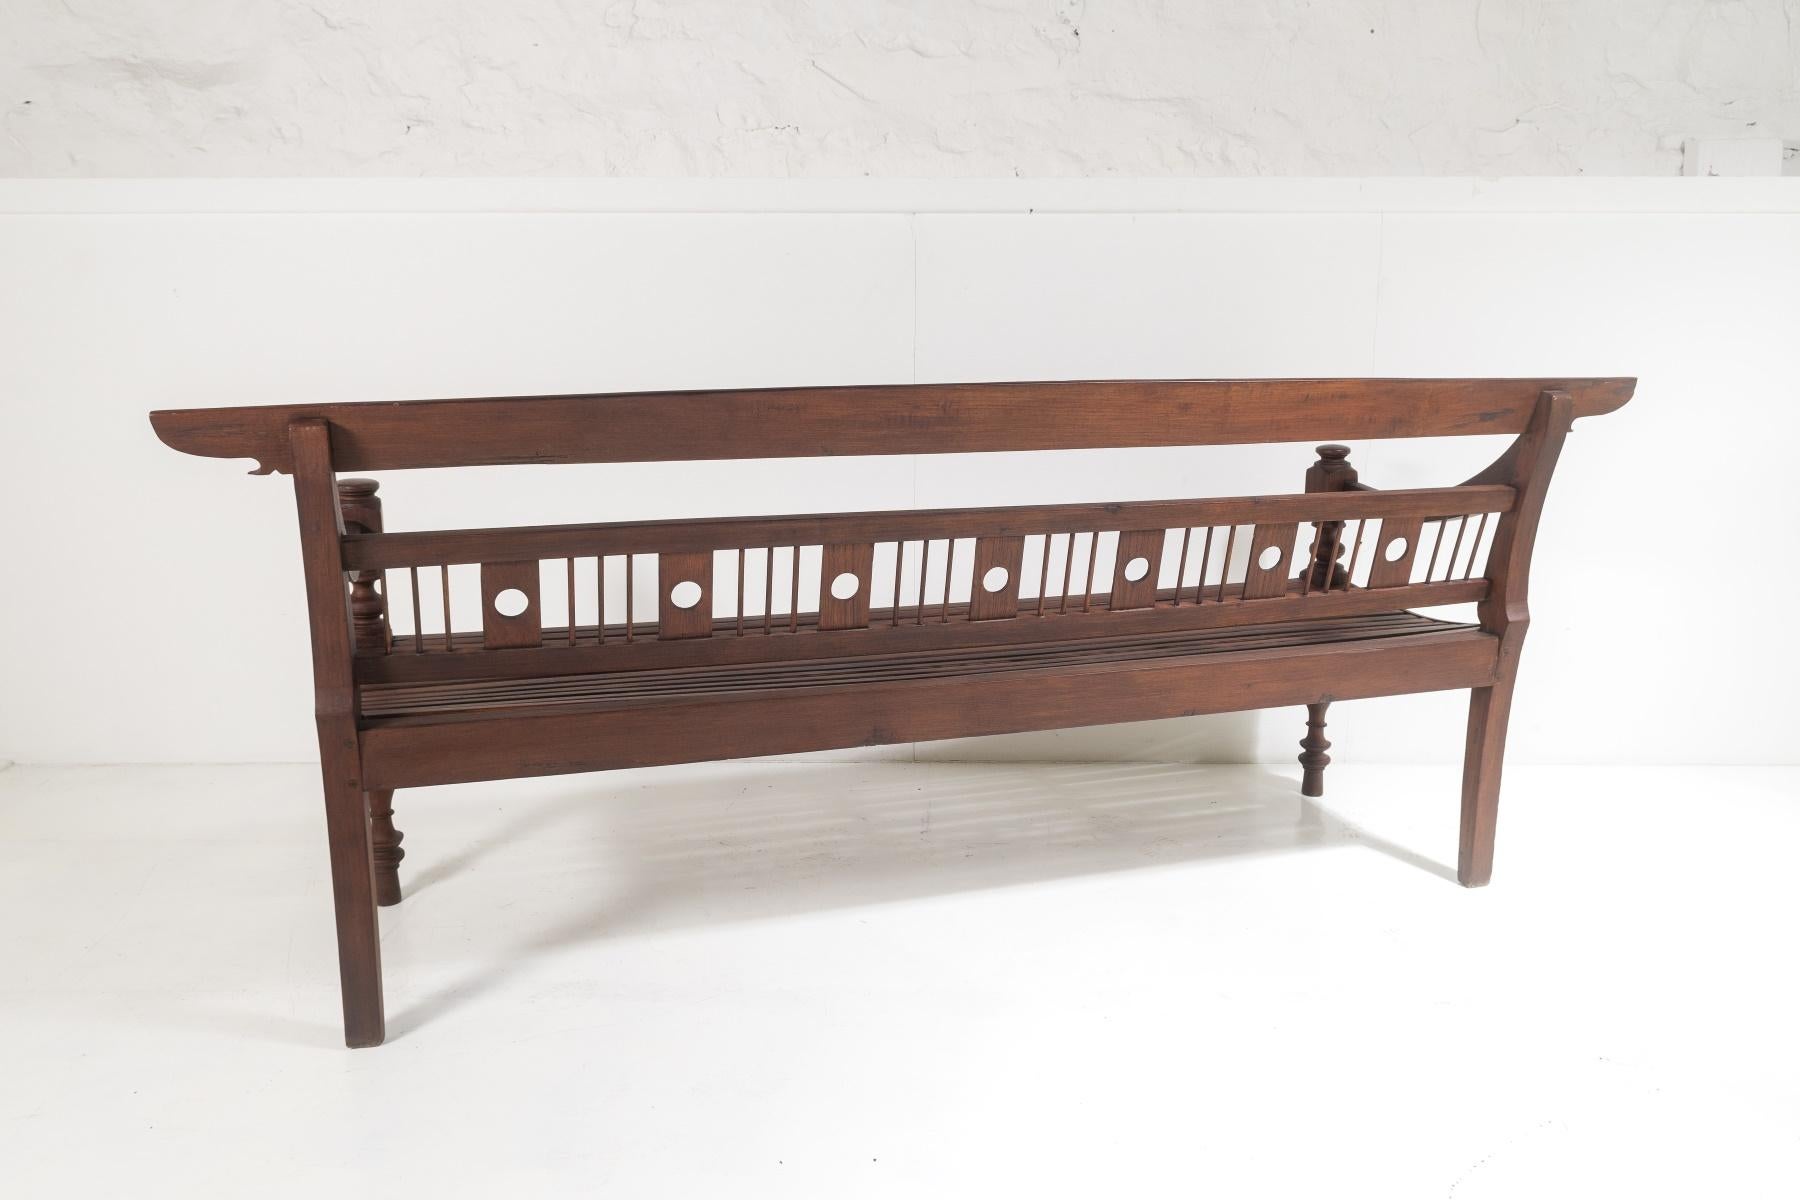 Hand-Crafted Antique Burmese Teak Bench Sofa Seat from Myanmar (Burma) – 3 seater For Sale